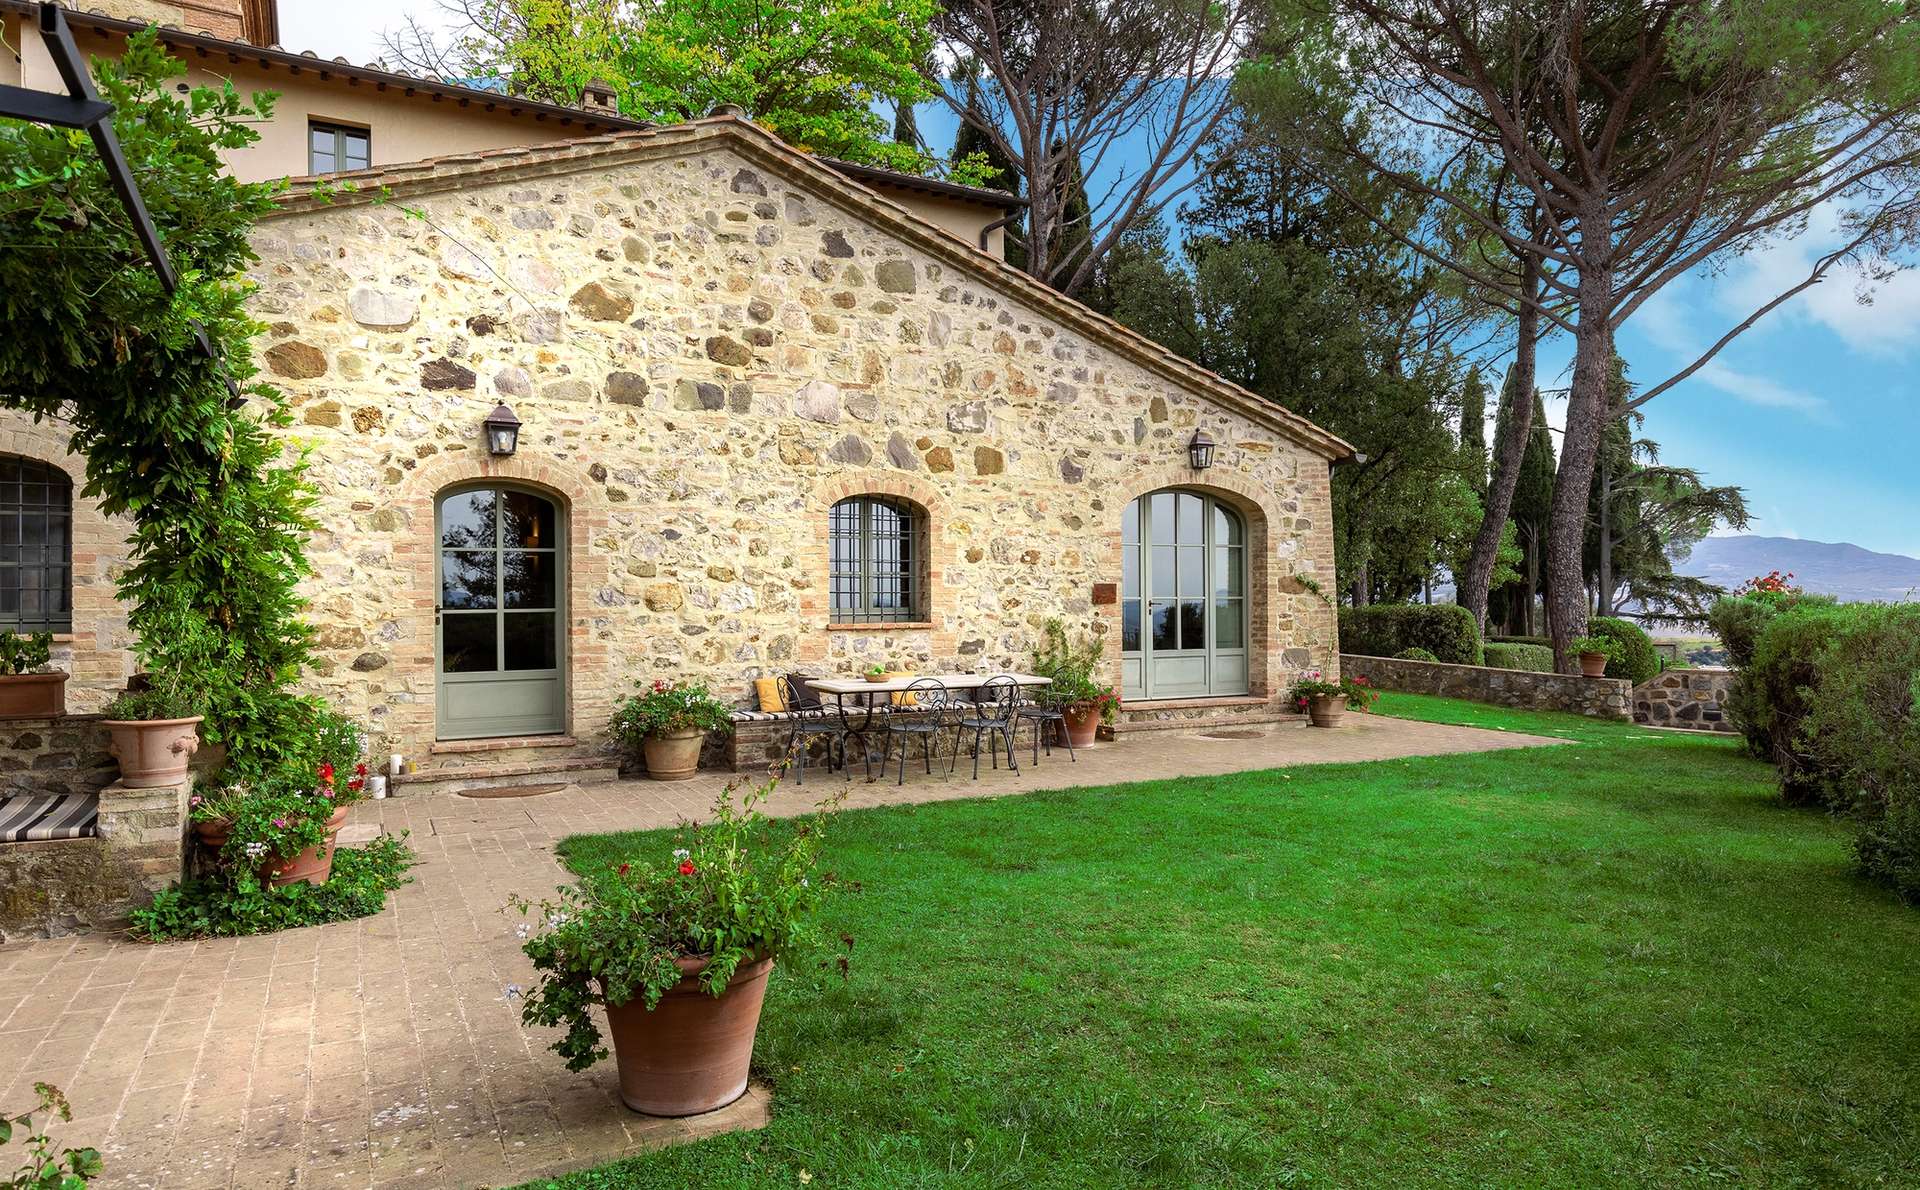 Typical Tuscan farmhouse. Here's a characteristic luxury villa for rent